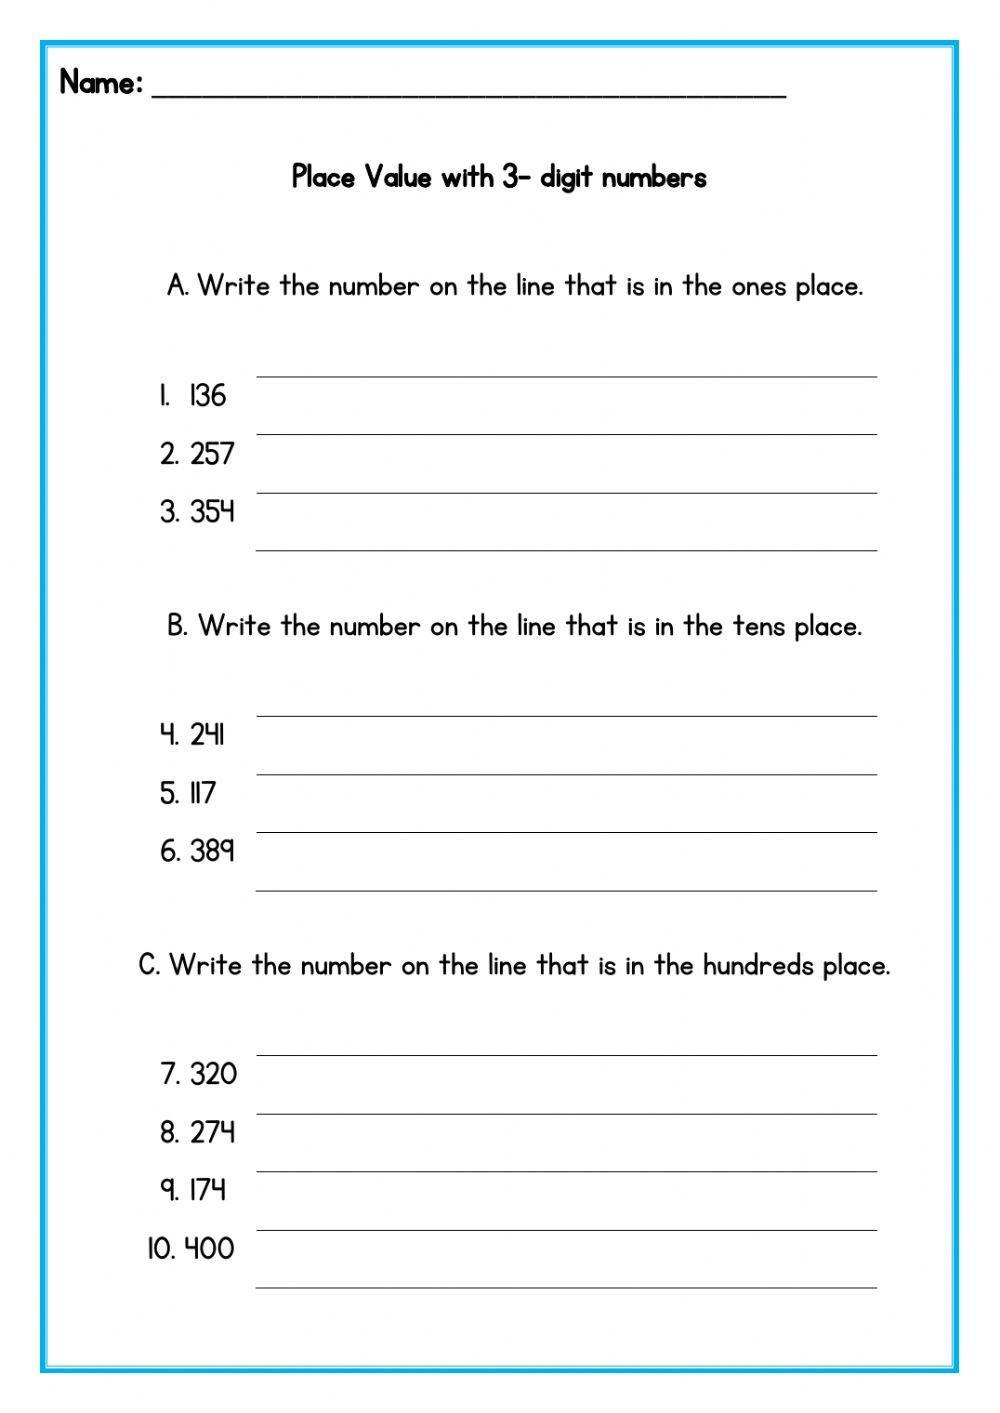 Place Value 3 digit numbers